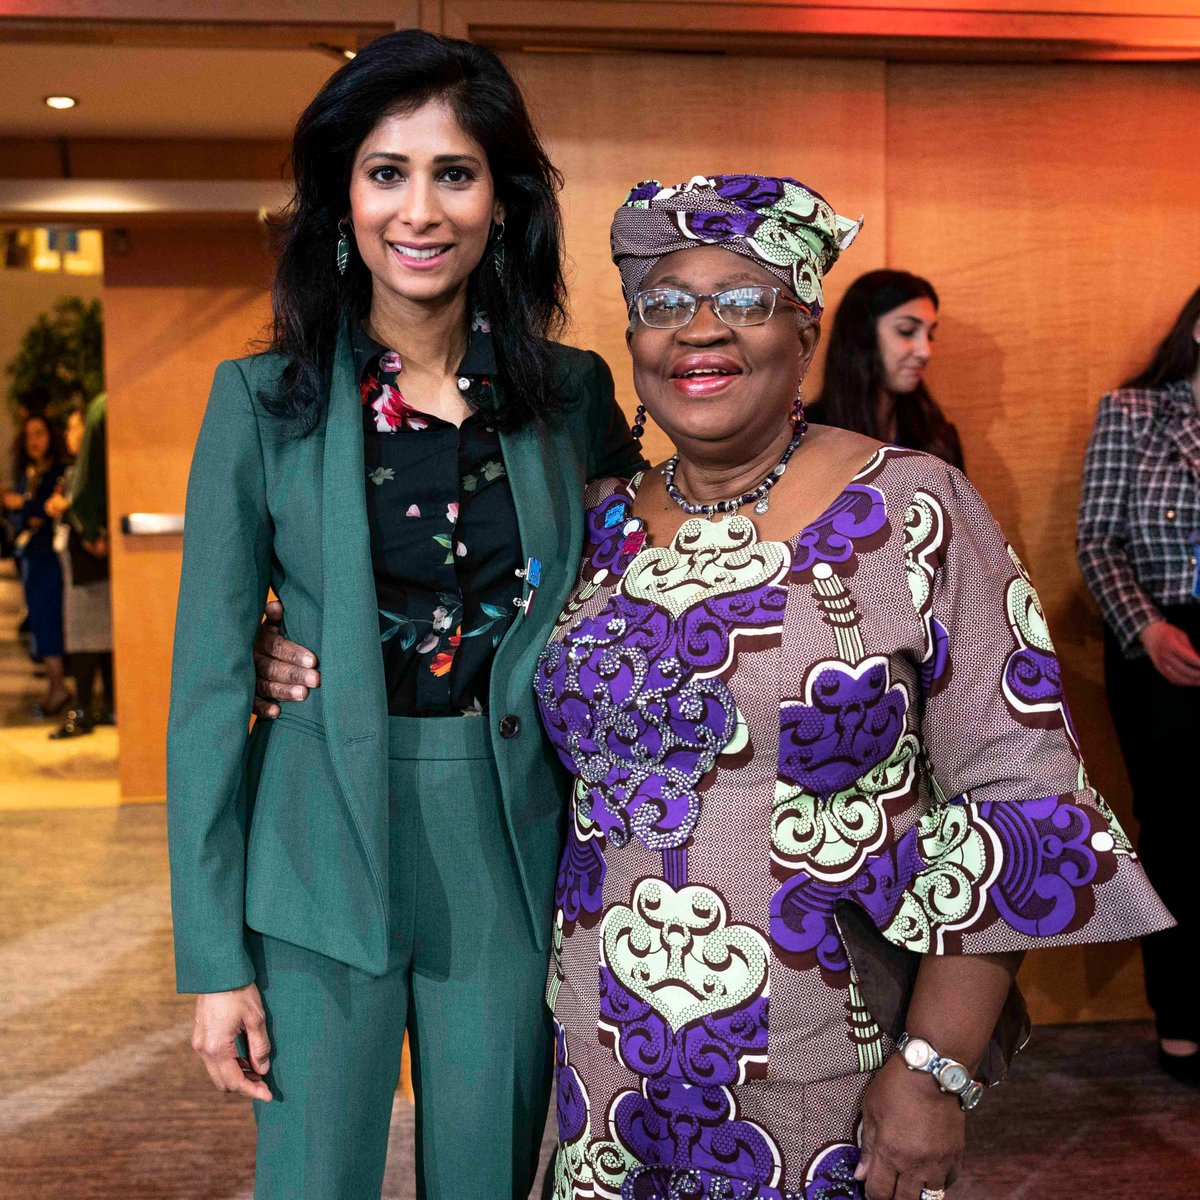 There are few leaders as impressive as Director-General of the World Trade Organization Ngozi Okonjo-Iweala @NOIweala @wto. We discussed the growing risks of economic fragmentation in a geopolitically divided world.